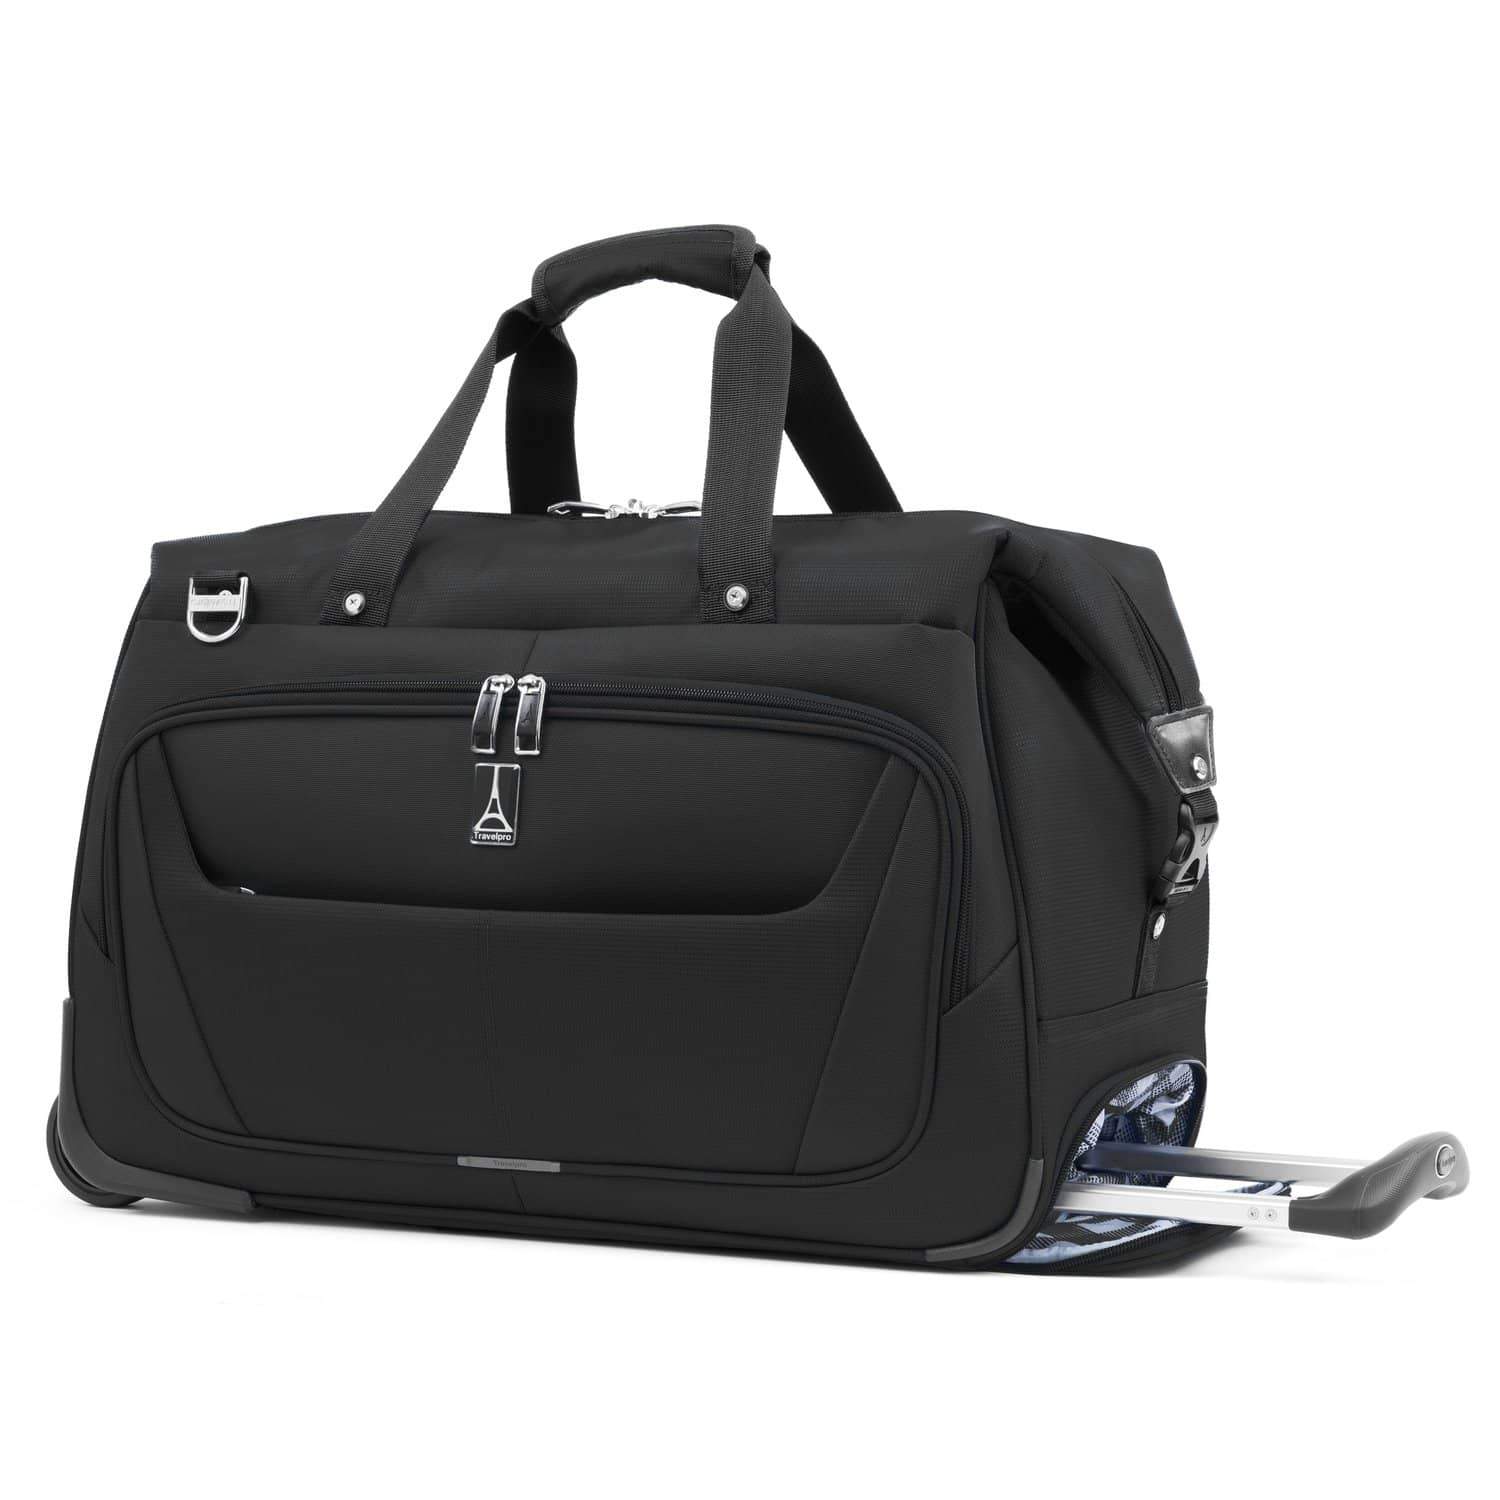 Travelpro Maxlite 5 Carry-On Rolling Duffel - Black - Irv’s Luggage